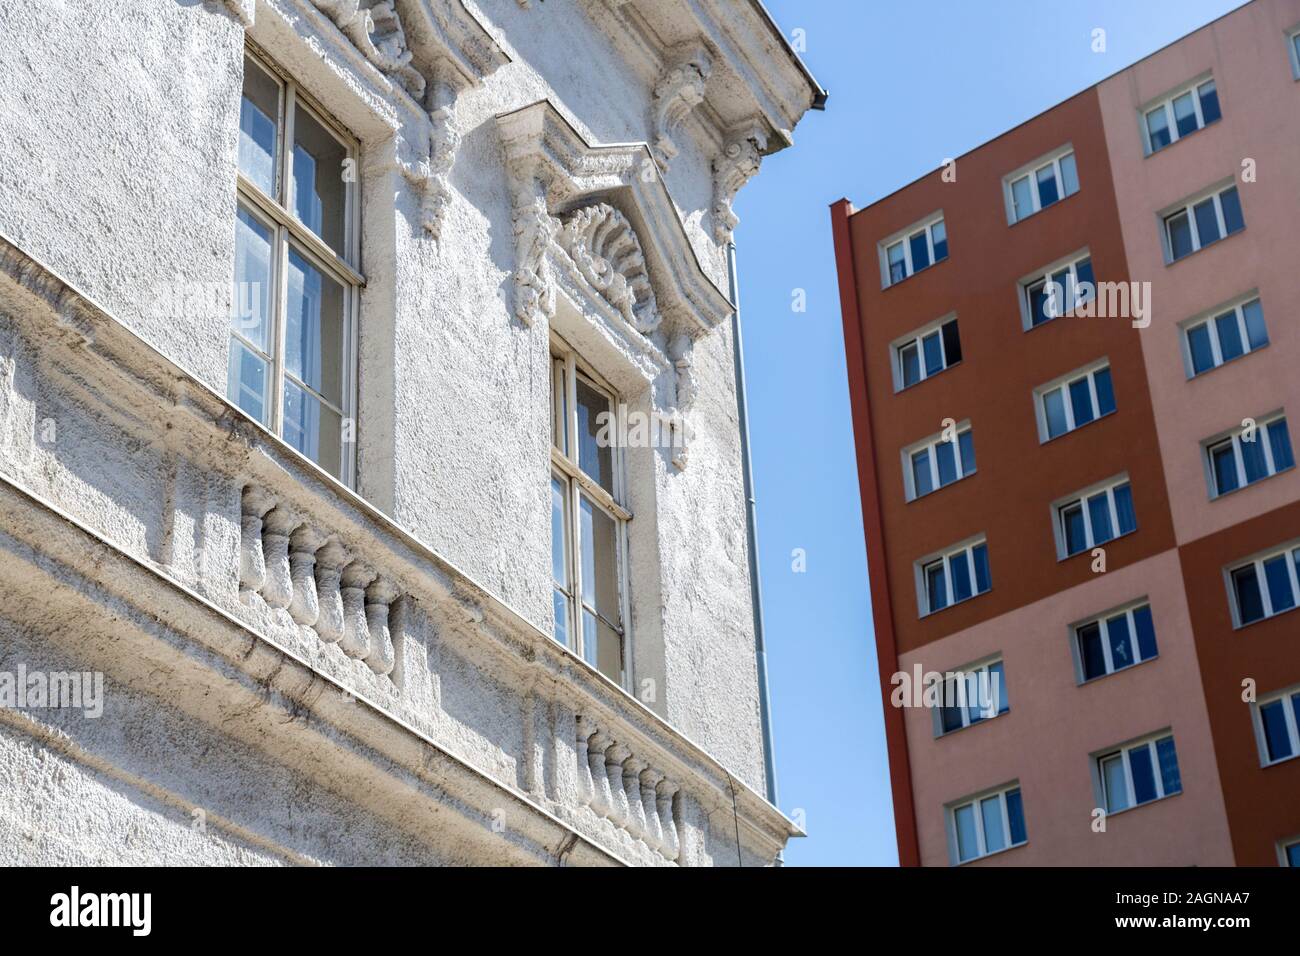 Old and new architecture, Brno, Czech Republic, Europe Stock Photo